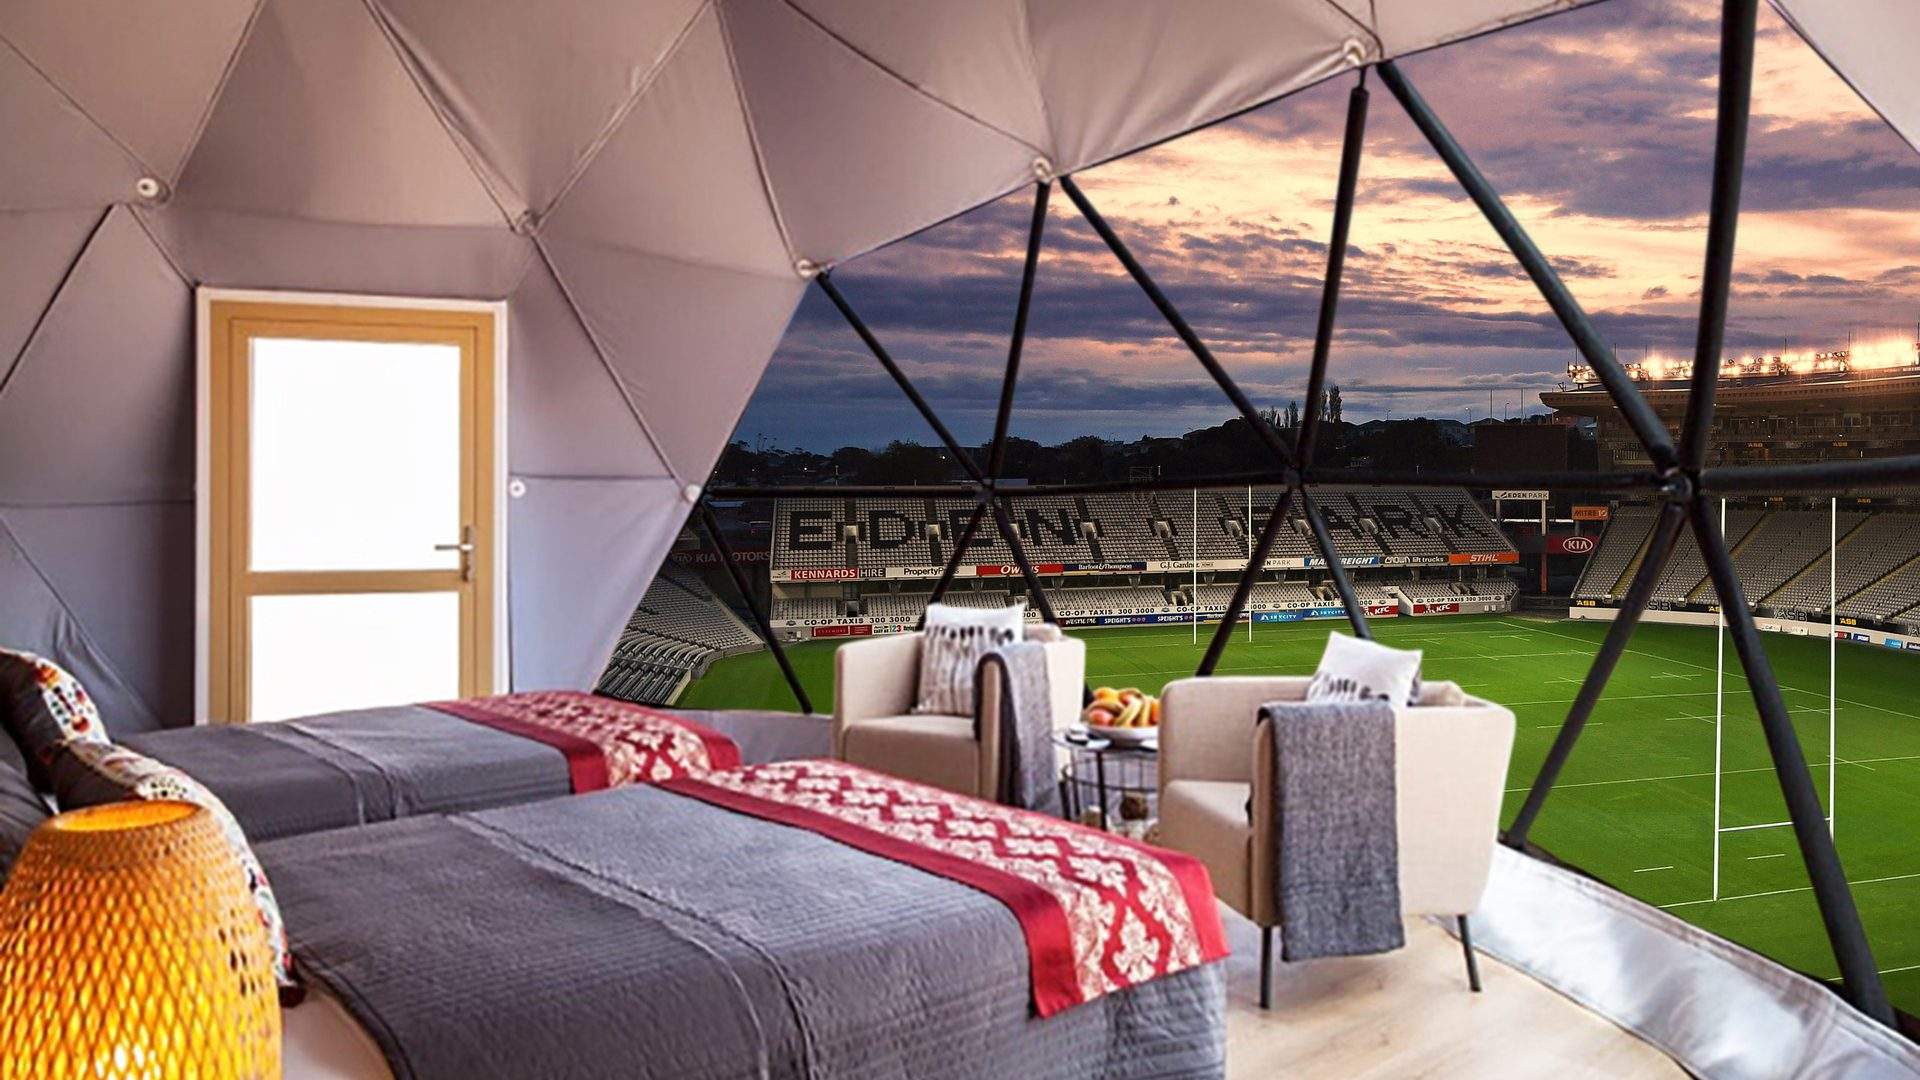 Eden Park Is Introducing a New Stadium Glamping Experience